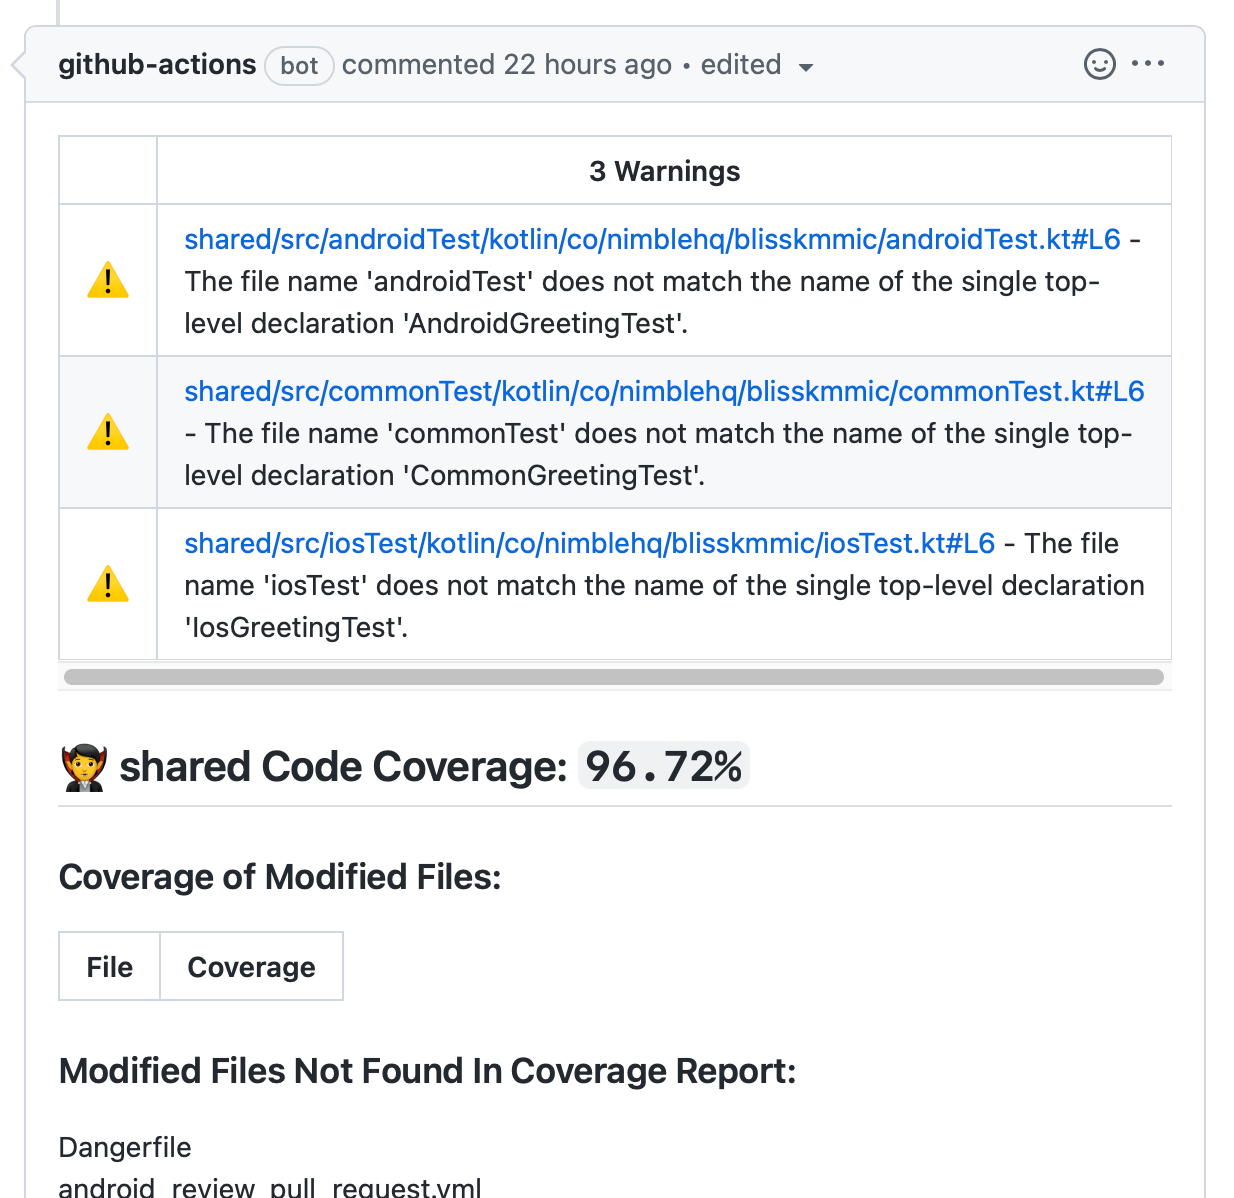 Danger on a pull request